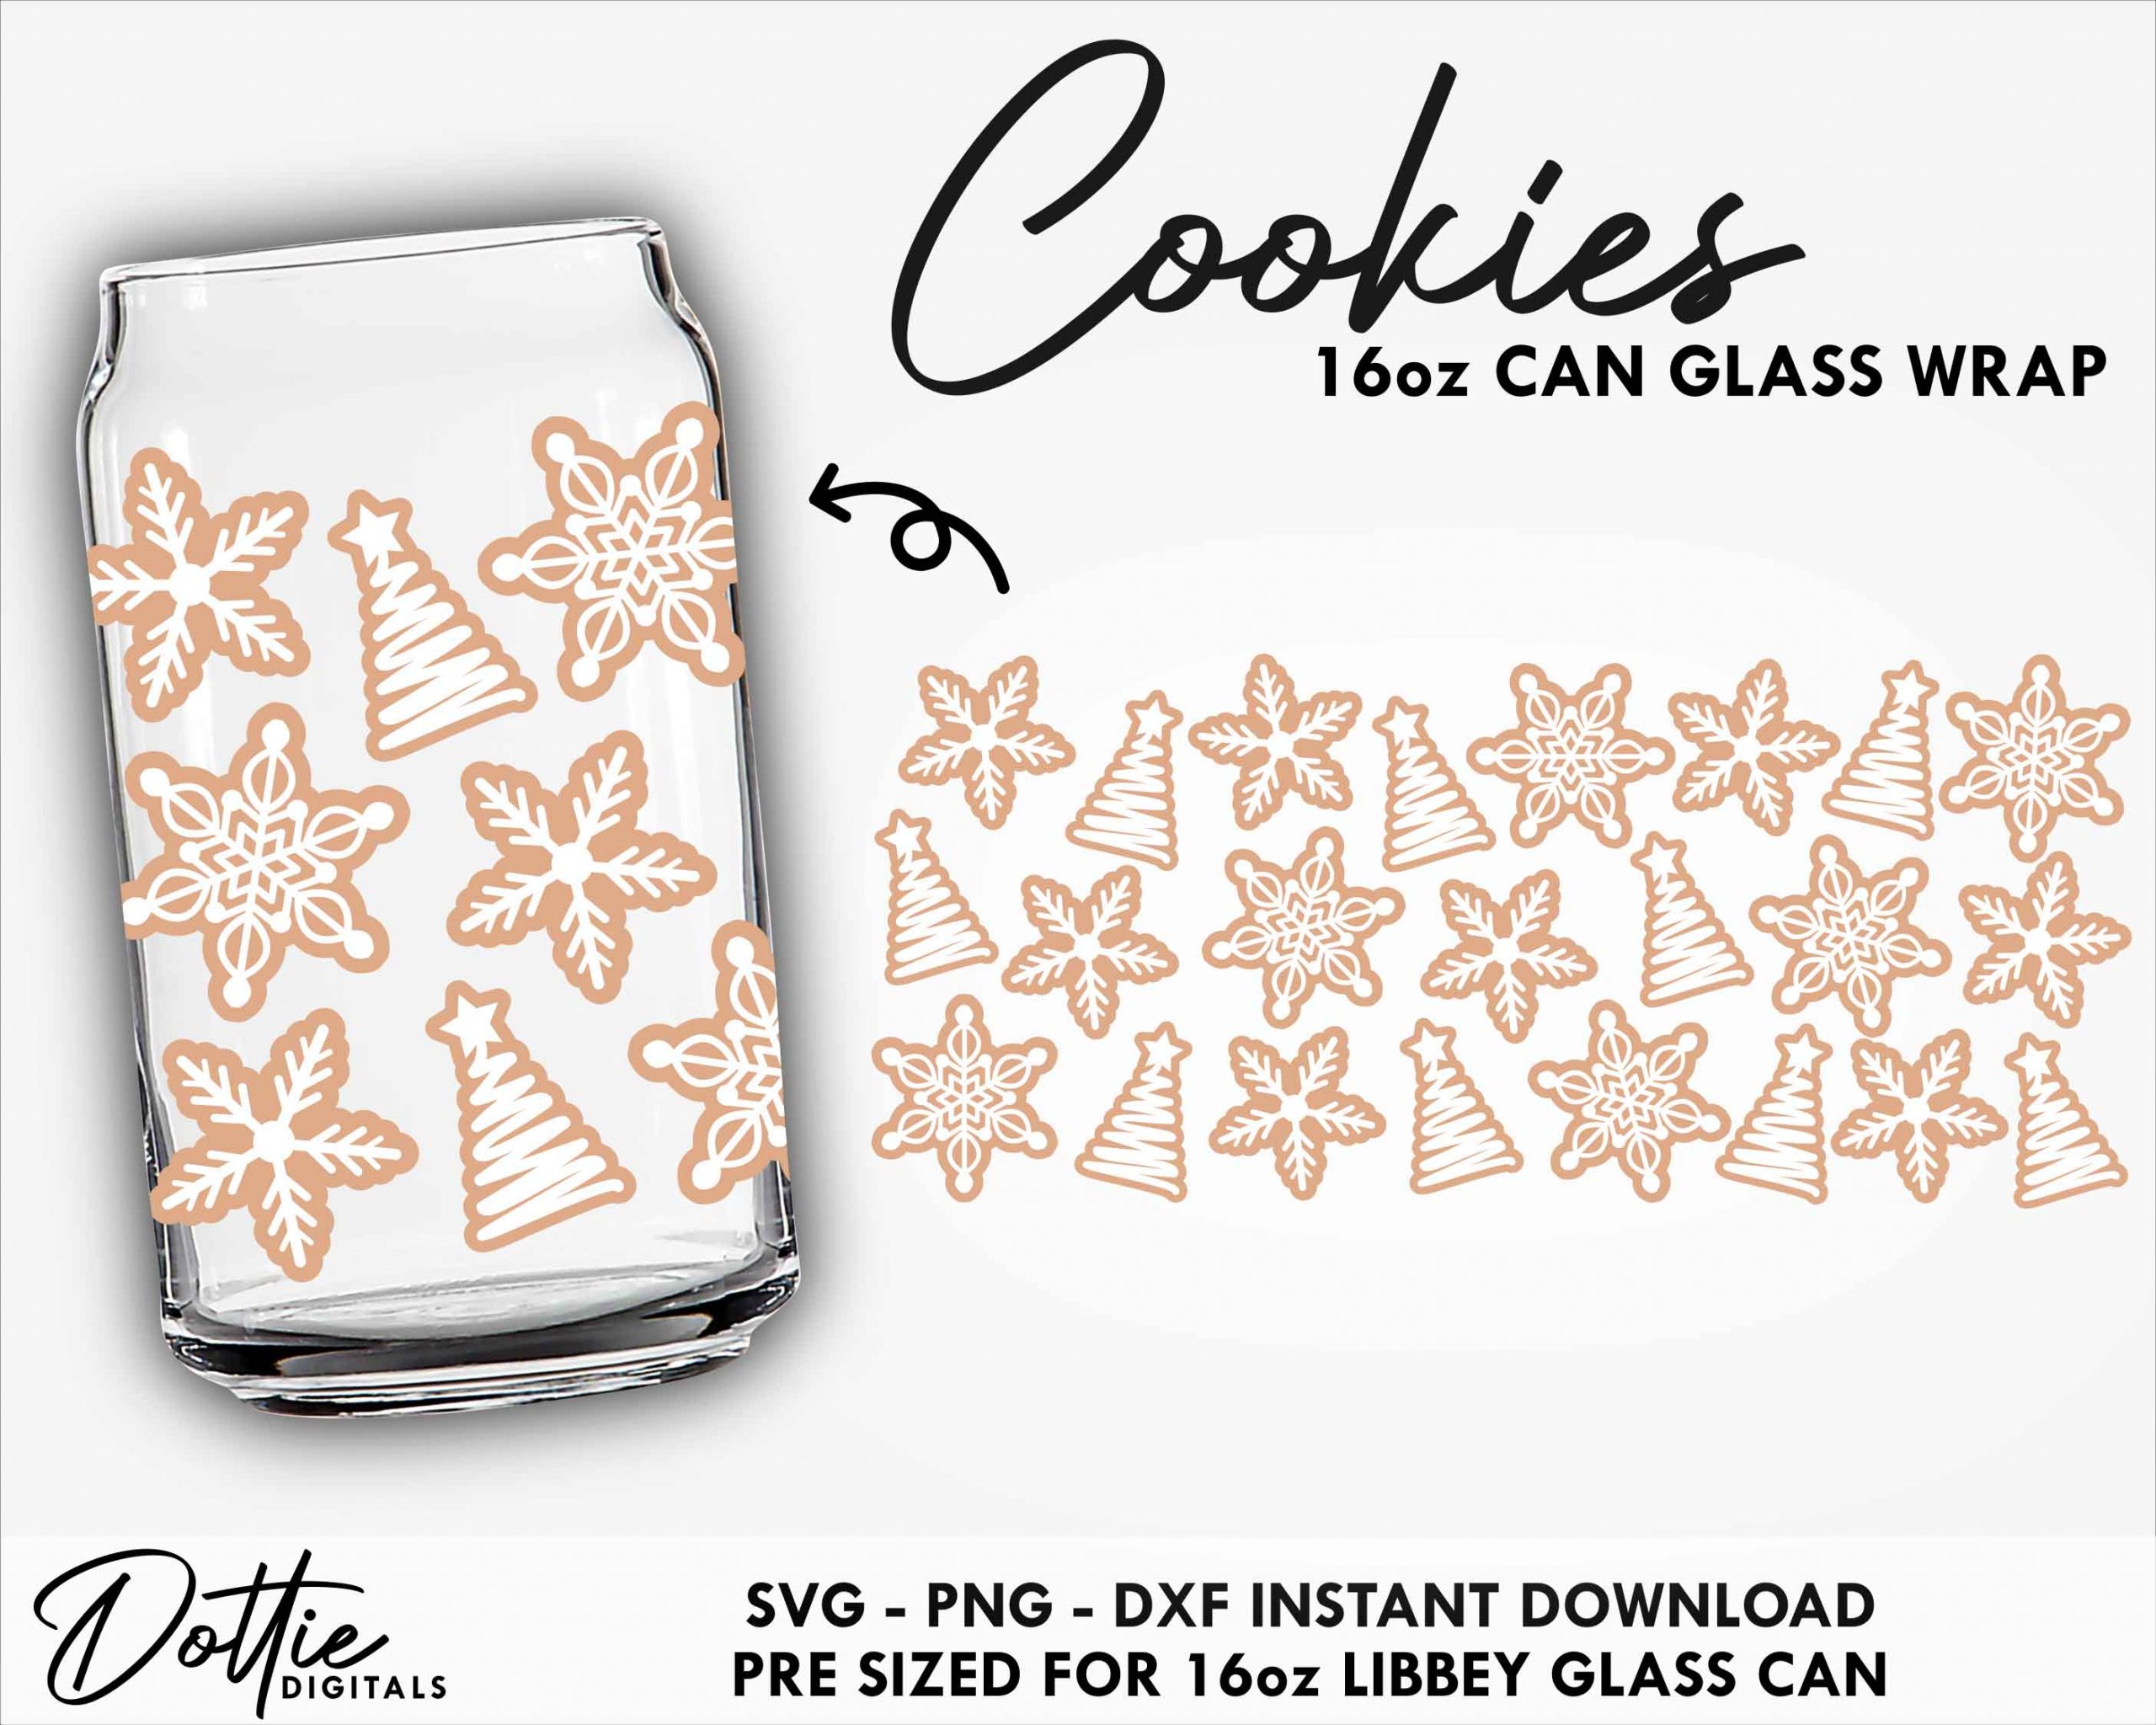 https://dottiedigitals.com/wp-content/uploads/2021/11/Christmas-Cookies-Libbey-Glass-Wrap-SVG-Festive-16oz-Libbey-Can-Svg-PNG-DXF-Xmas-Libbey-Cutting-File-Instant-Digital-Download-1-scaled.jpg